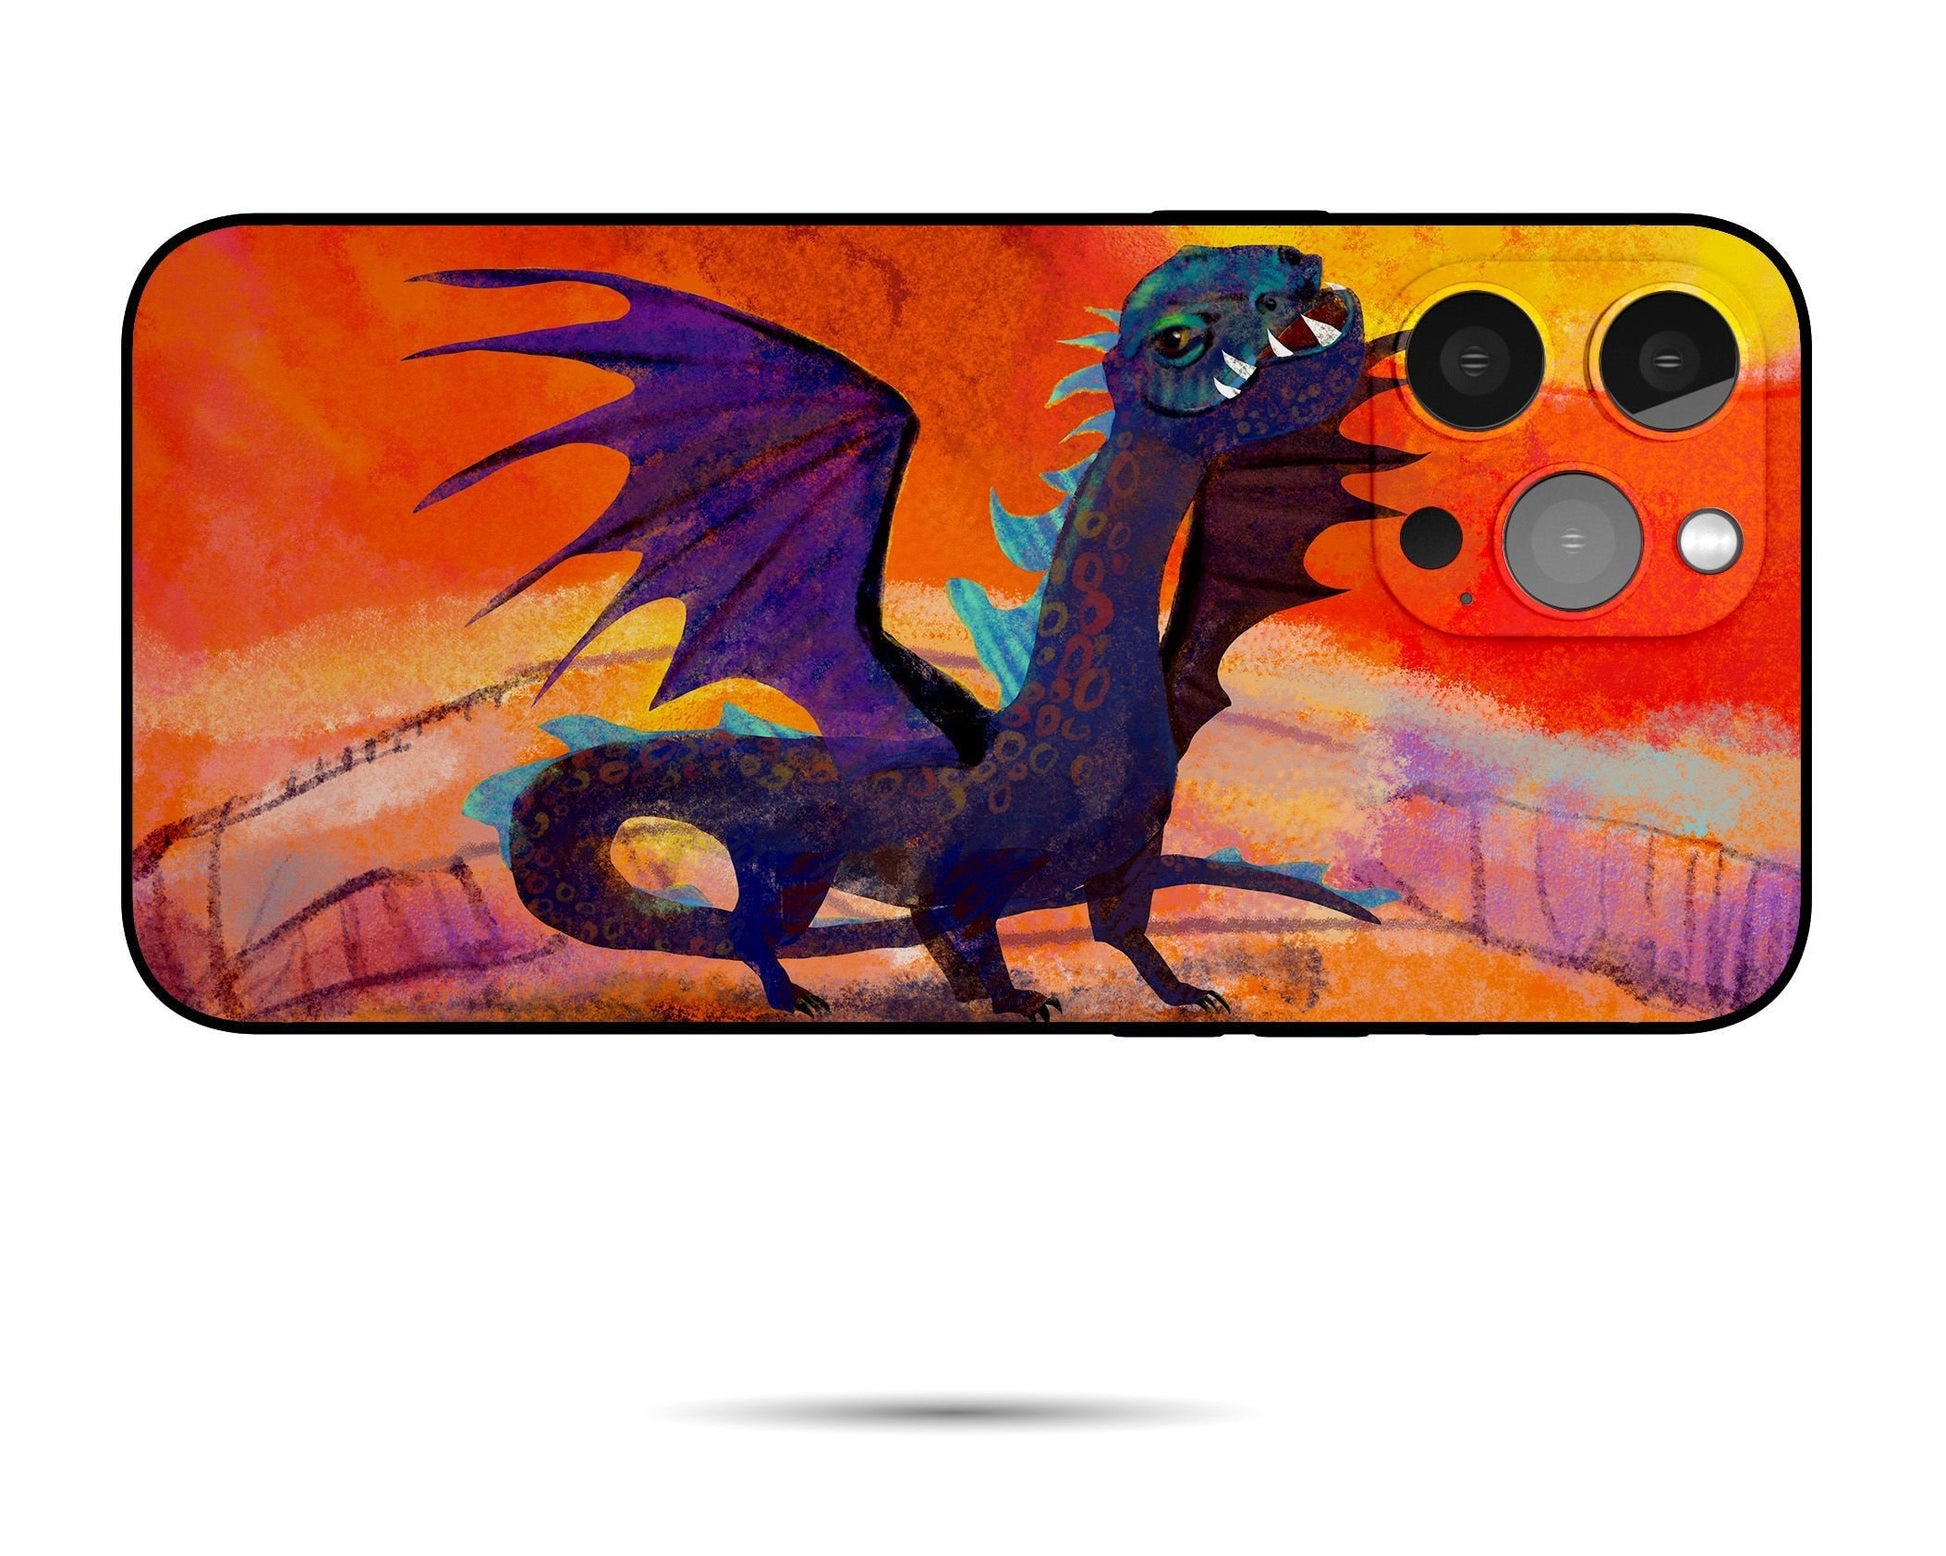 Dragon Iphone 14 Pro Case, Iphone 13 Pro Max, Iphone Se 2022 Case, Iphone 8 Plus Case Art, Aesthetic Iphone, Gift For Her, Silicone Case